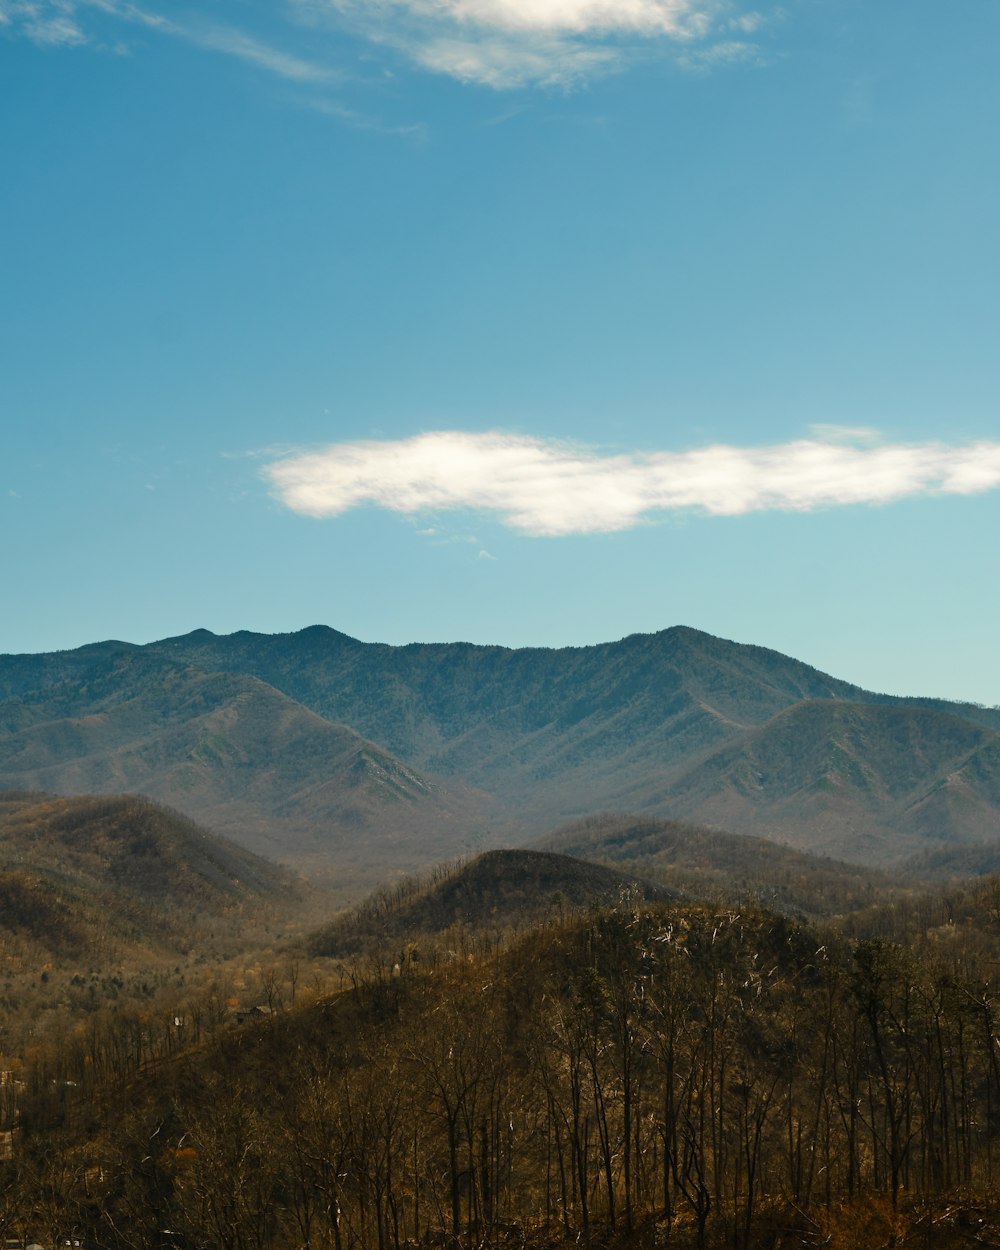 a view of a mountain range in the distance